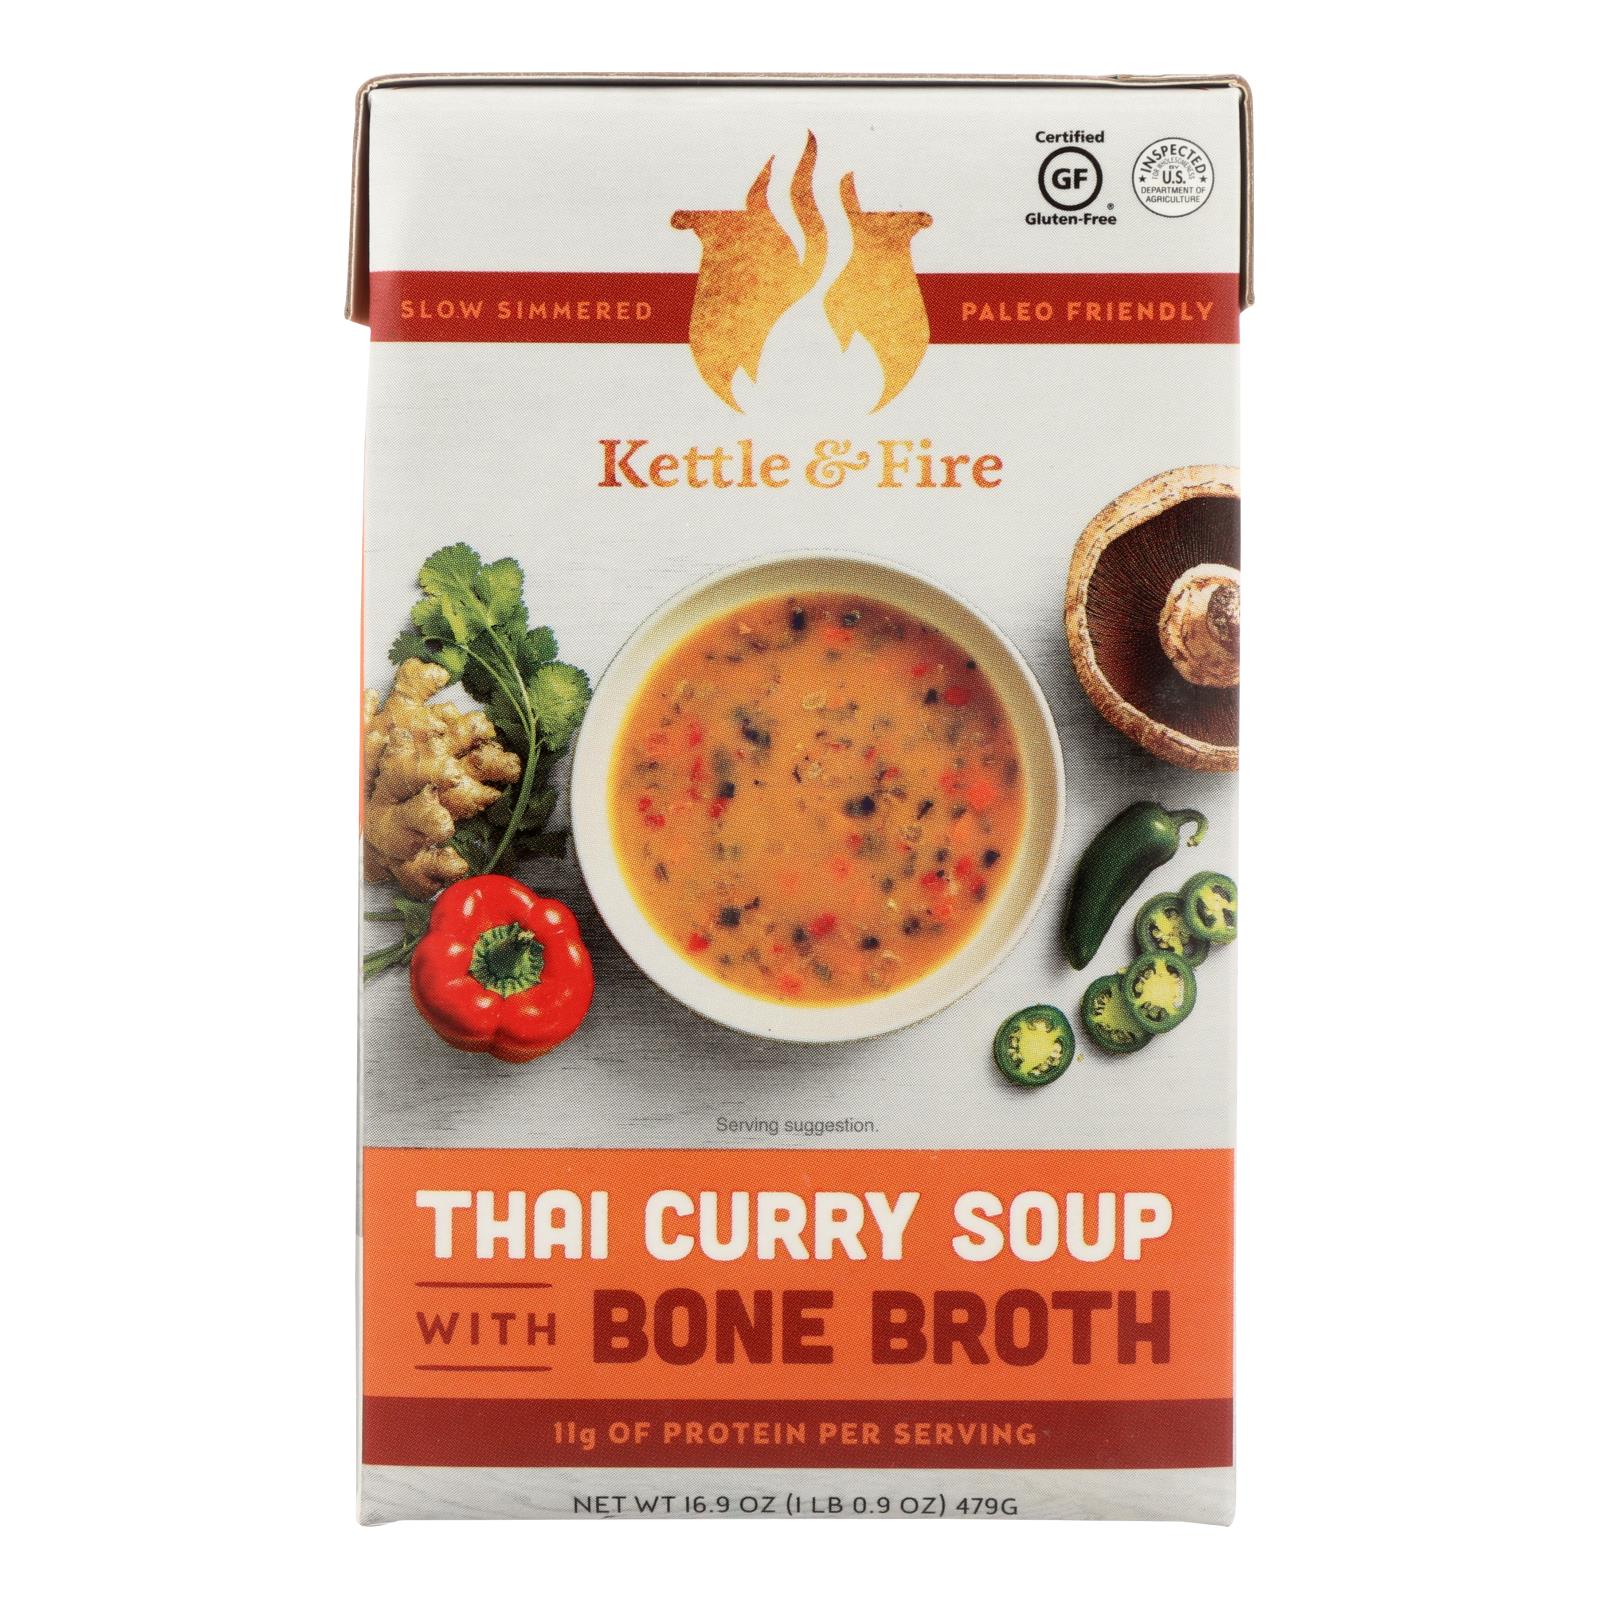 Kettle And Fire Thai Curry Soup With Bone Broth - 6개 묶음상품 - 16.9 OZ